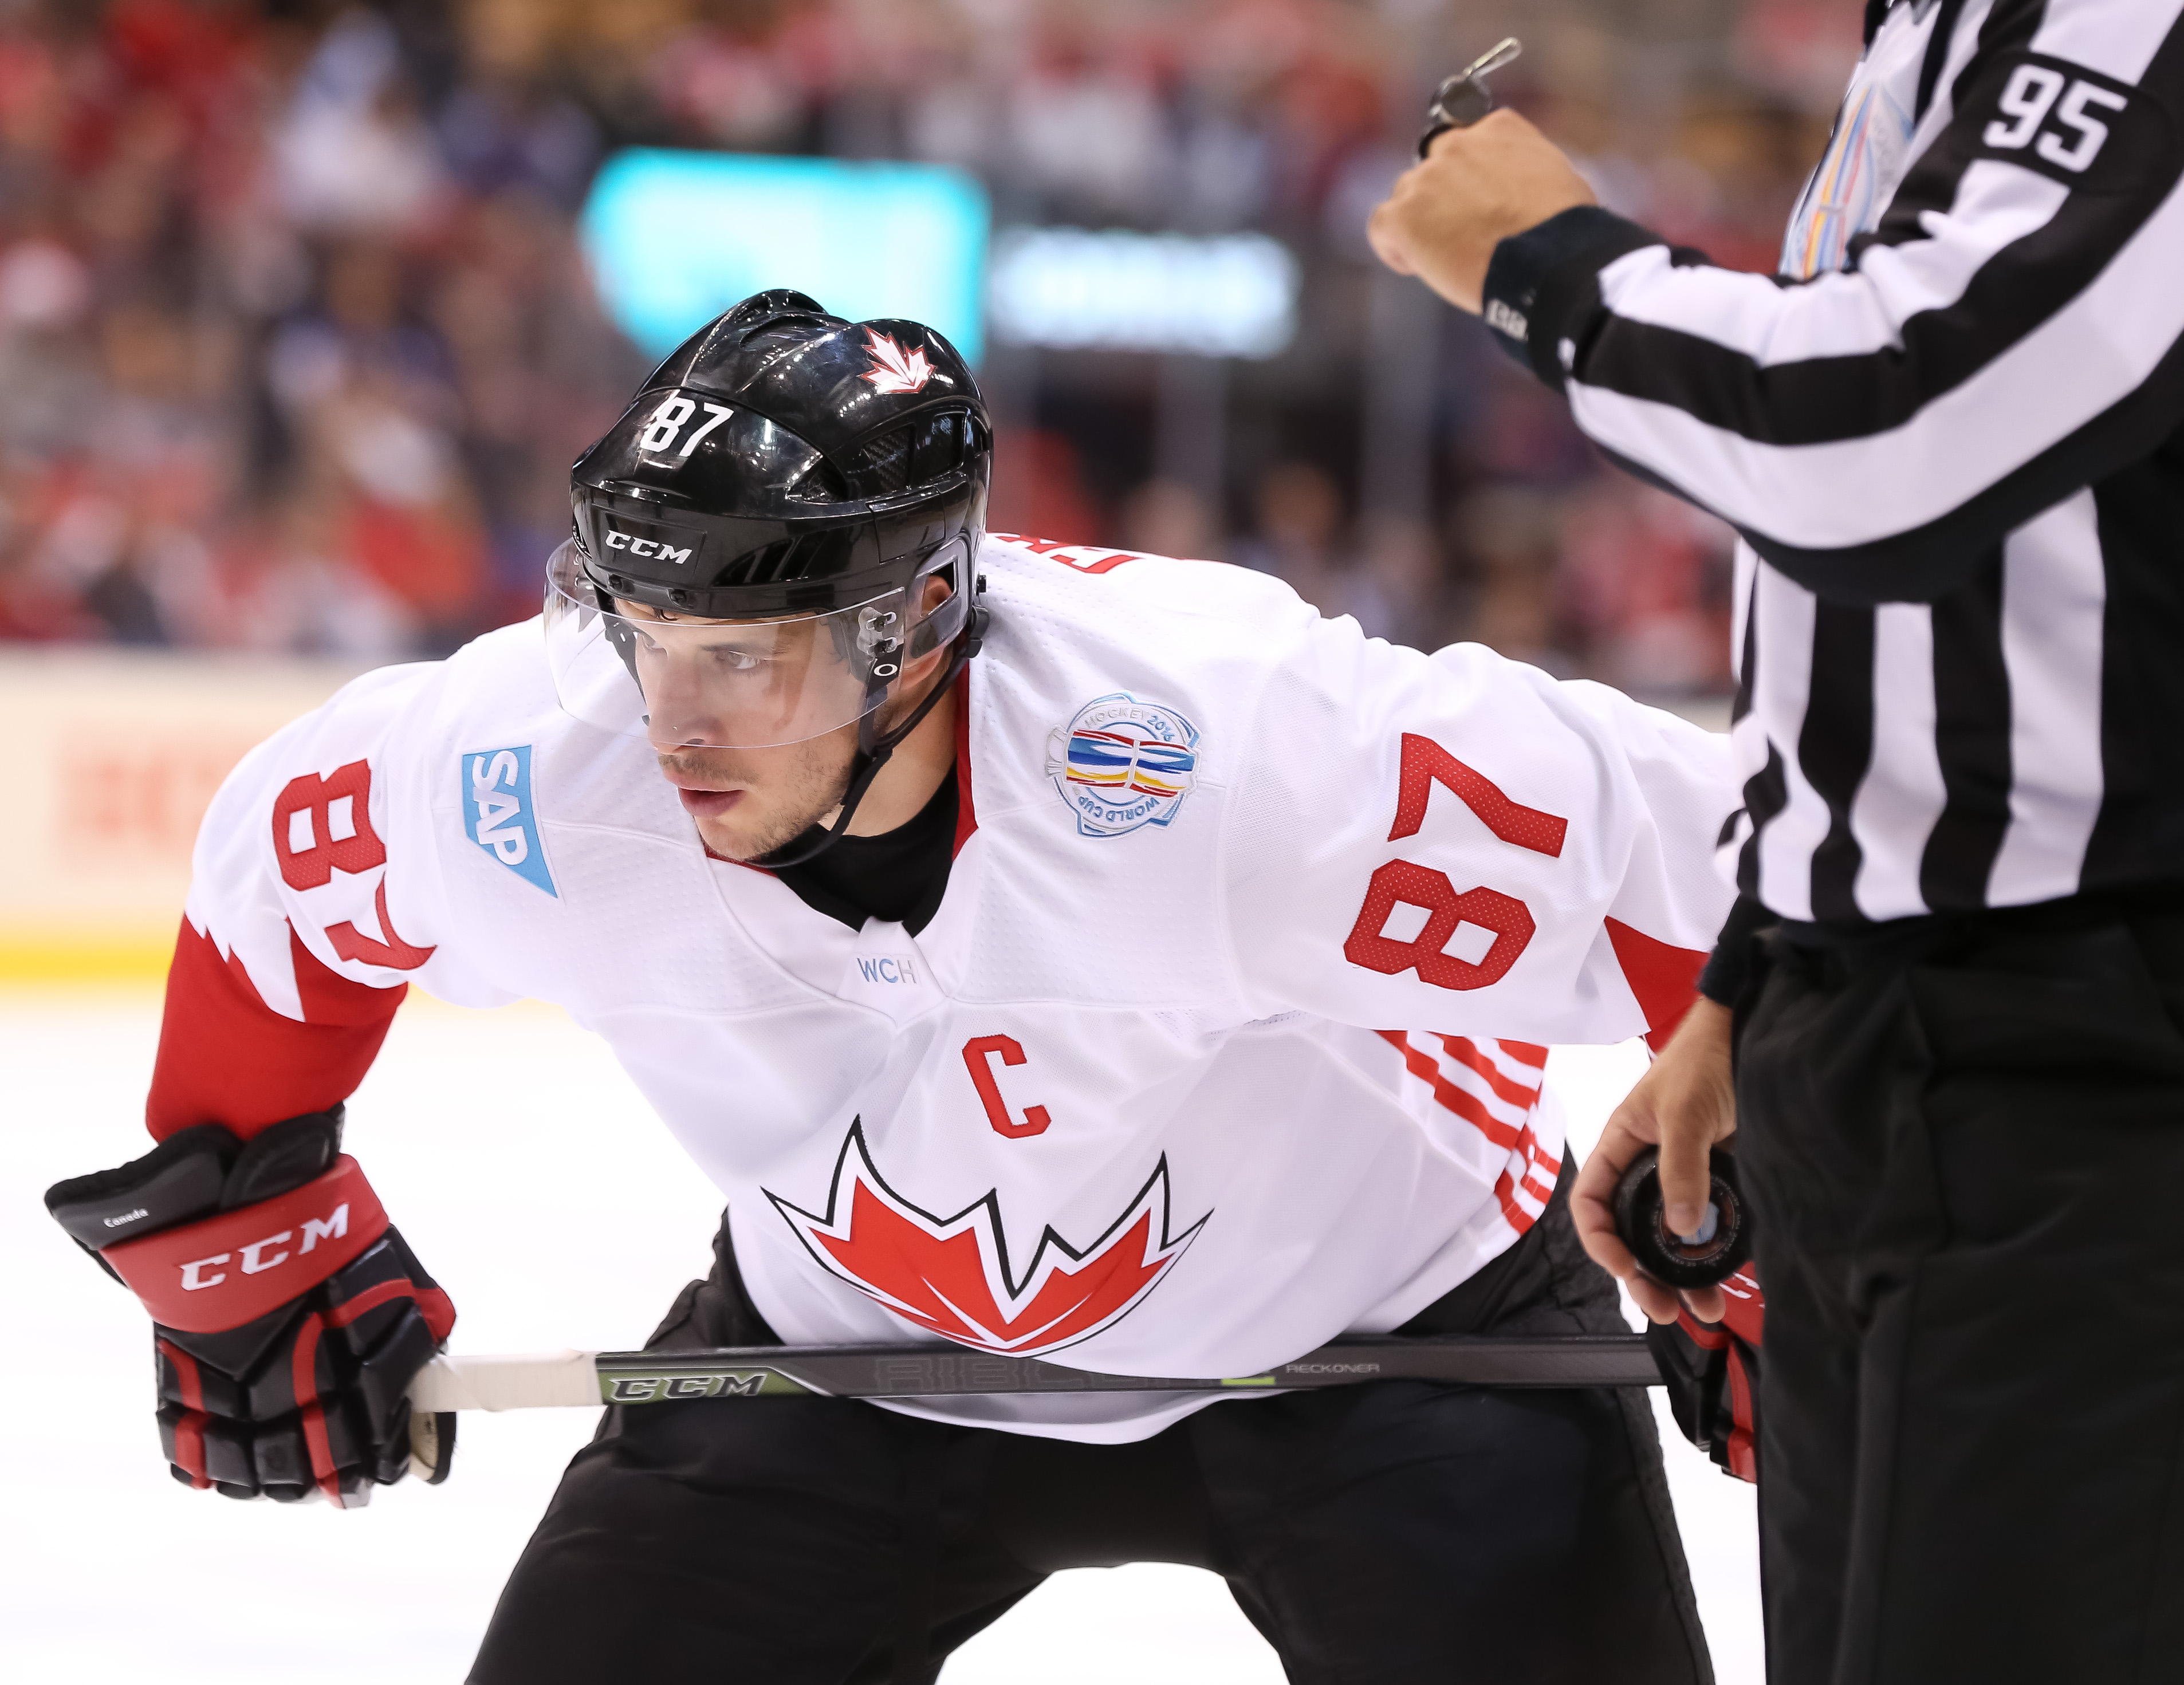 Sidney Crosby of Team Canada prepares for a face-off against Team Europe during Game Two of the World Cup of Hockey final series at the Air Canada Centre on September 29, 2016 in Toronto, Ontario, Canada.